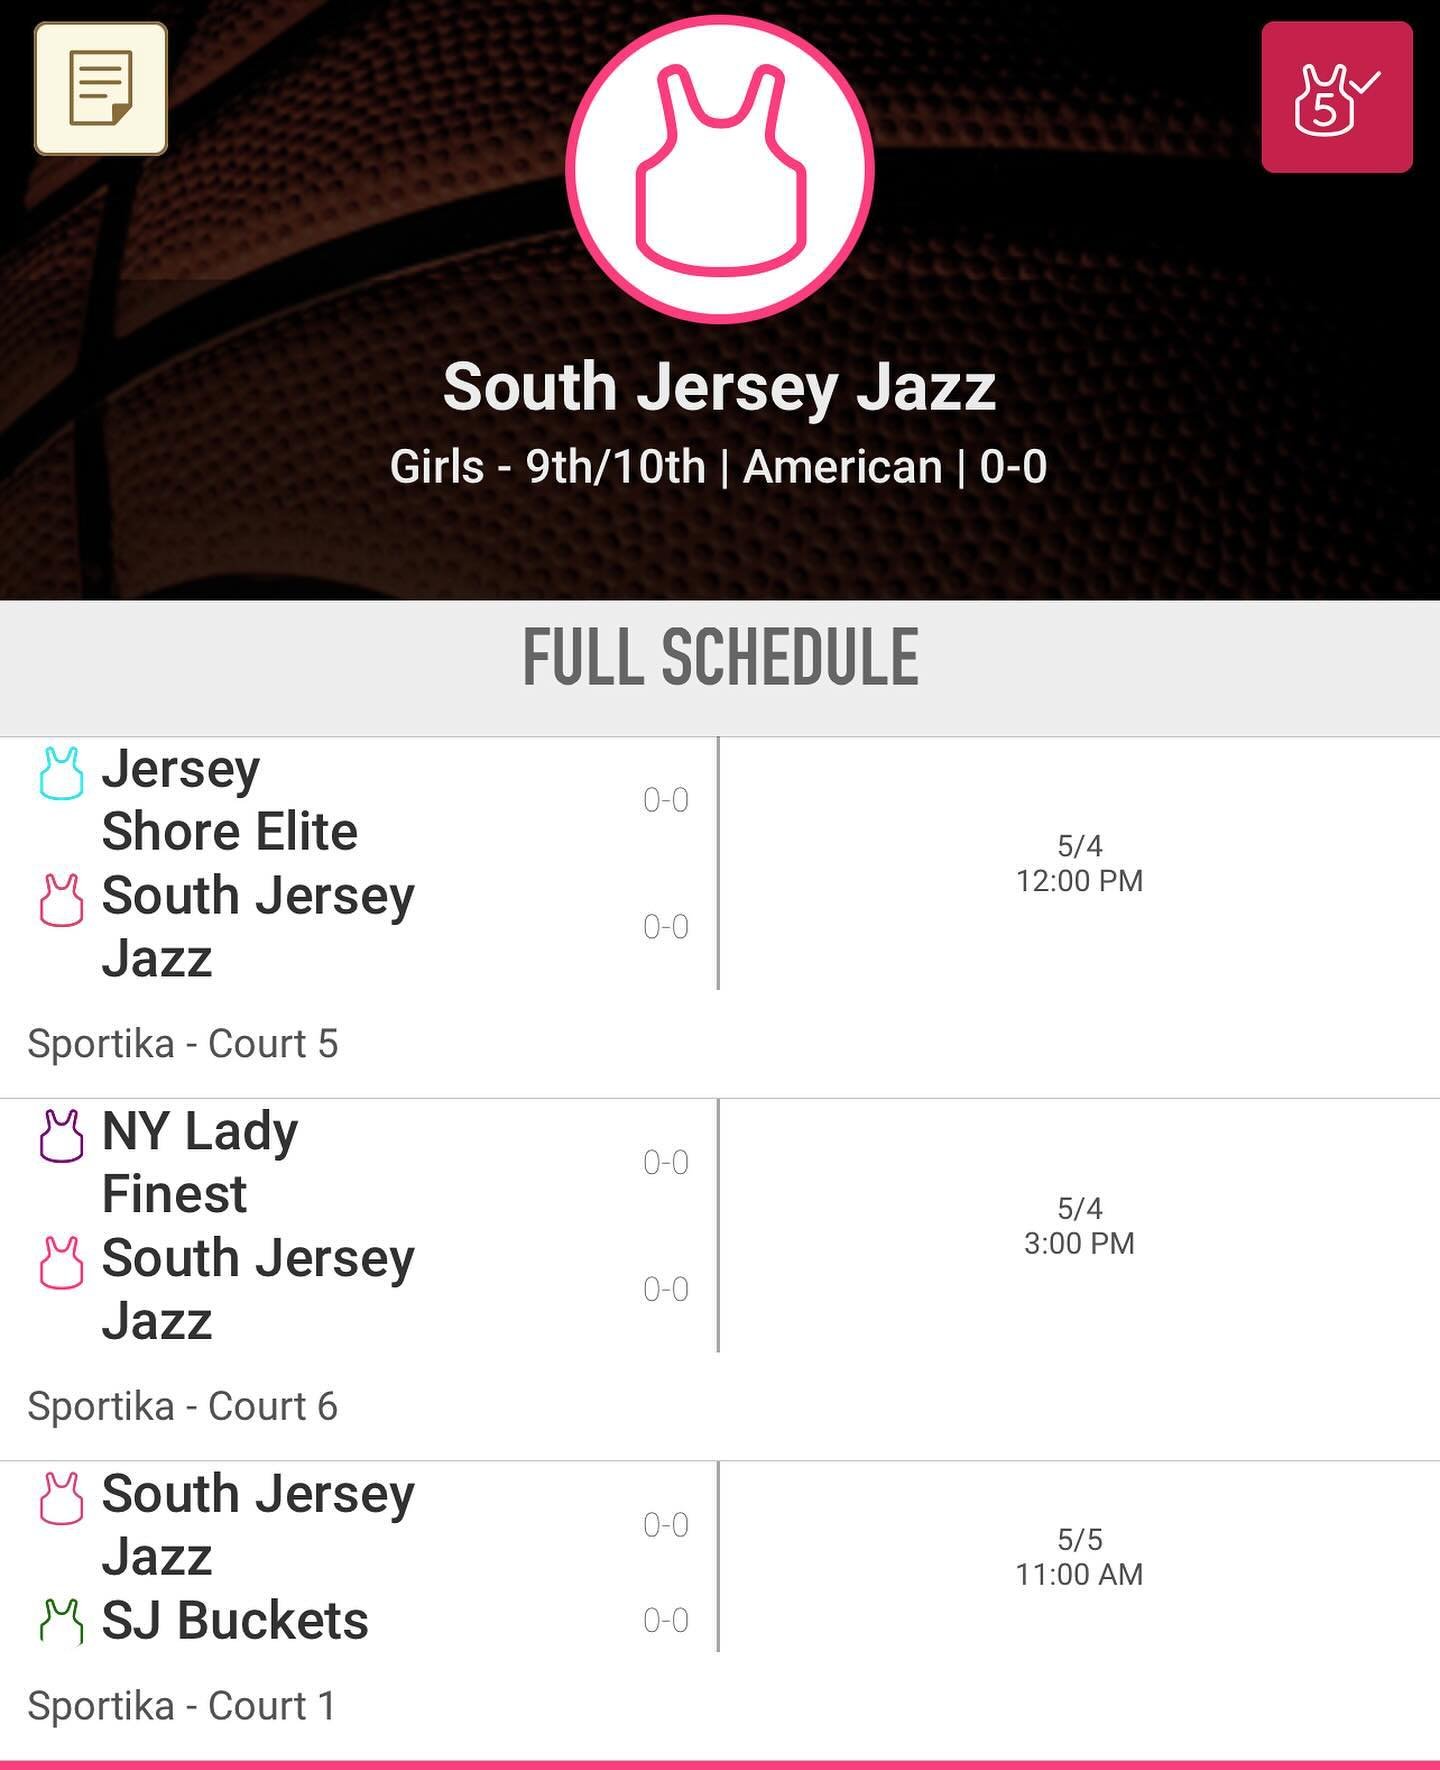 🔥OUR JAZZ TEAMS ARE PLAYING THROUGHOUT THE DELAWARE VALLEY THIS WEEKEND GOOD LUCK TO ALL OUR JAZZ TEAMS! BRING HOME SOME CHAMPIONSHIPS! 🏆 GO JAZZ!! 🔥